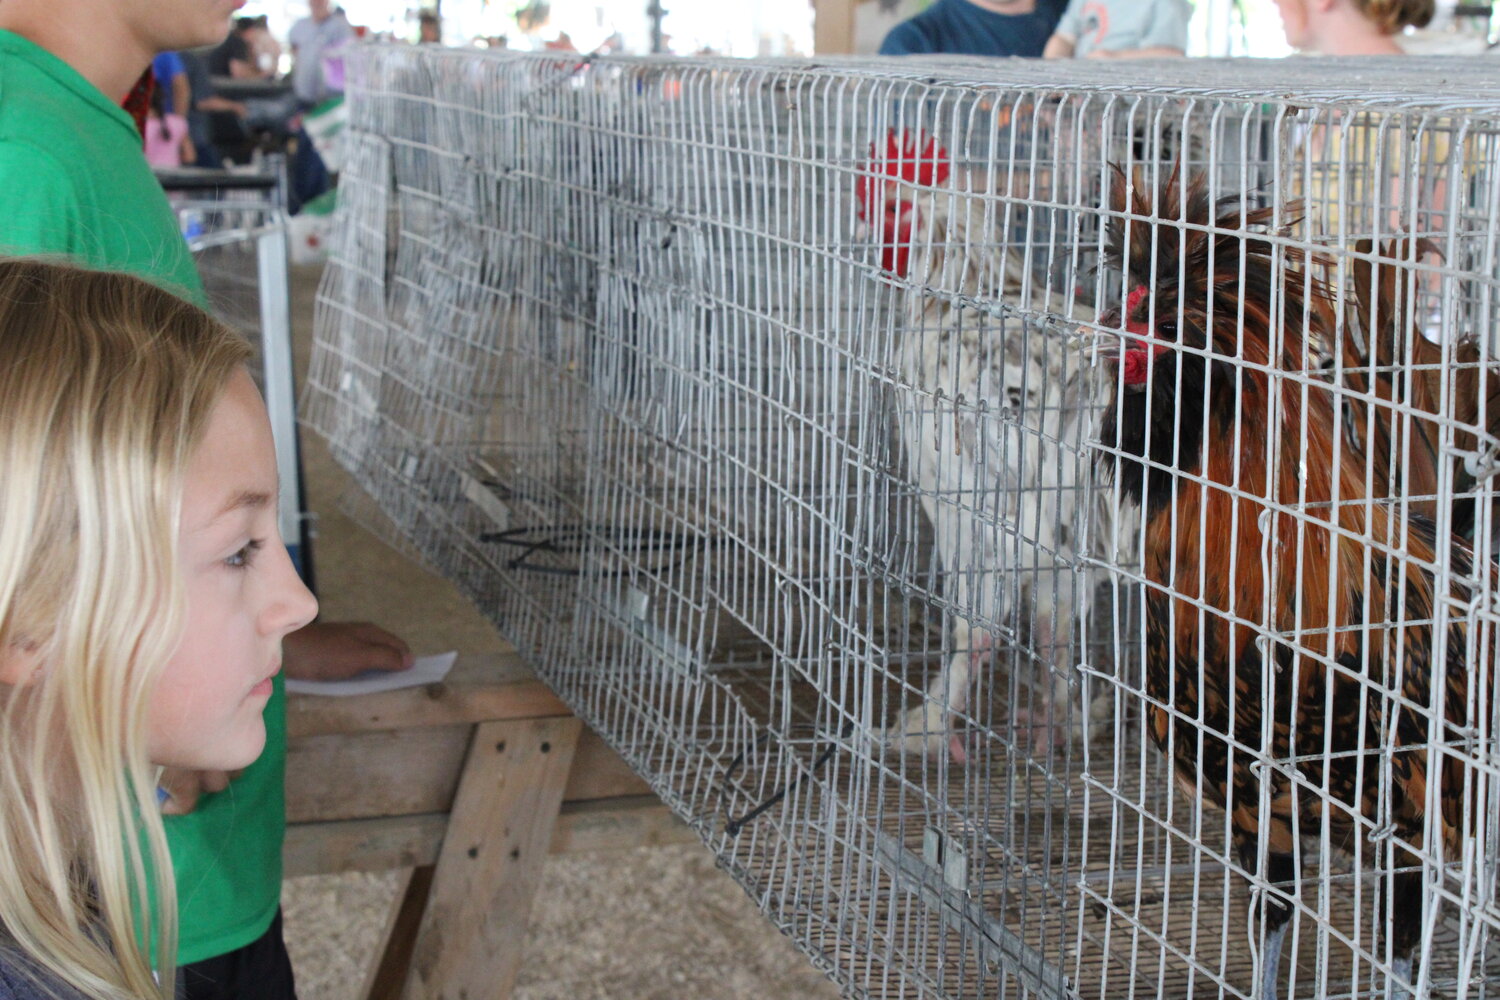 Doralynn Lee was not happy with her rooster's performance, so she got below the cage in an attempt to get her rooster to make noise.